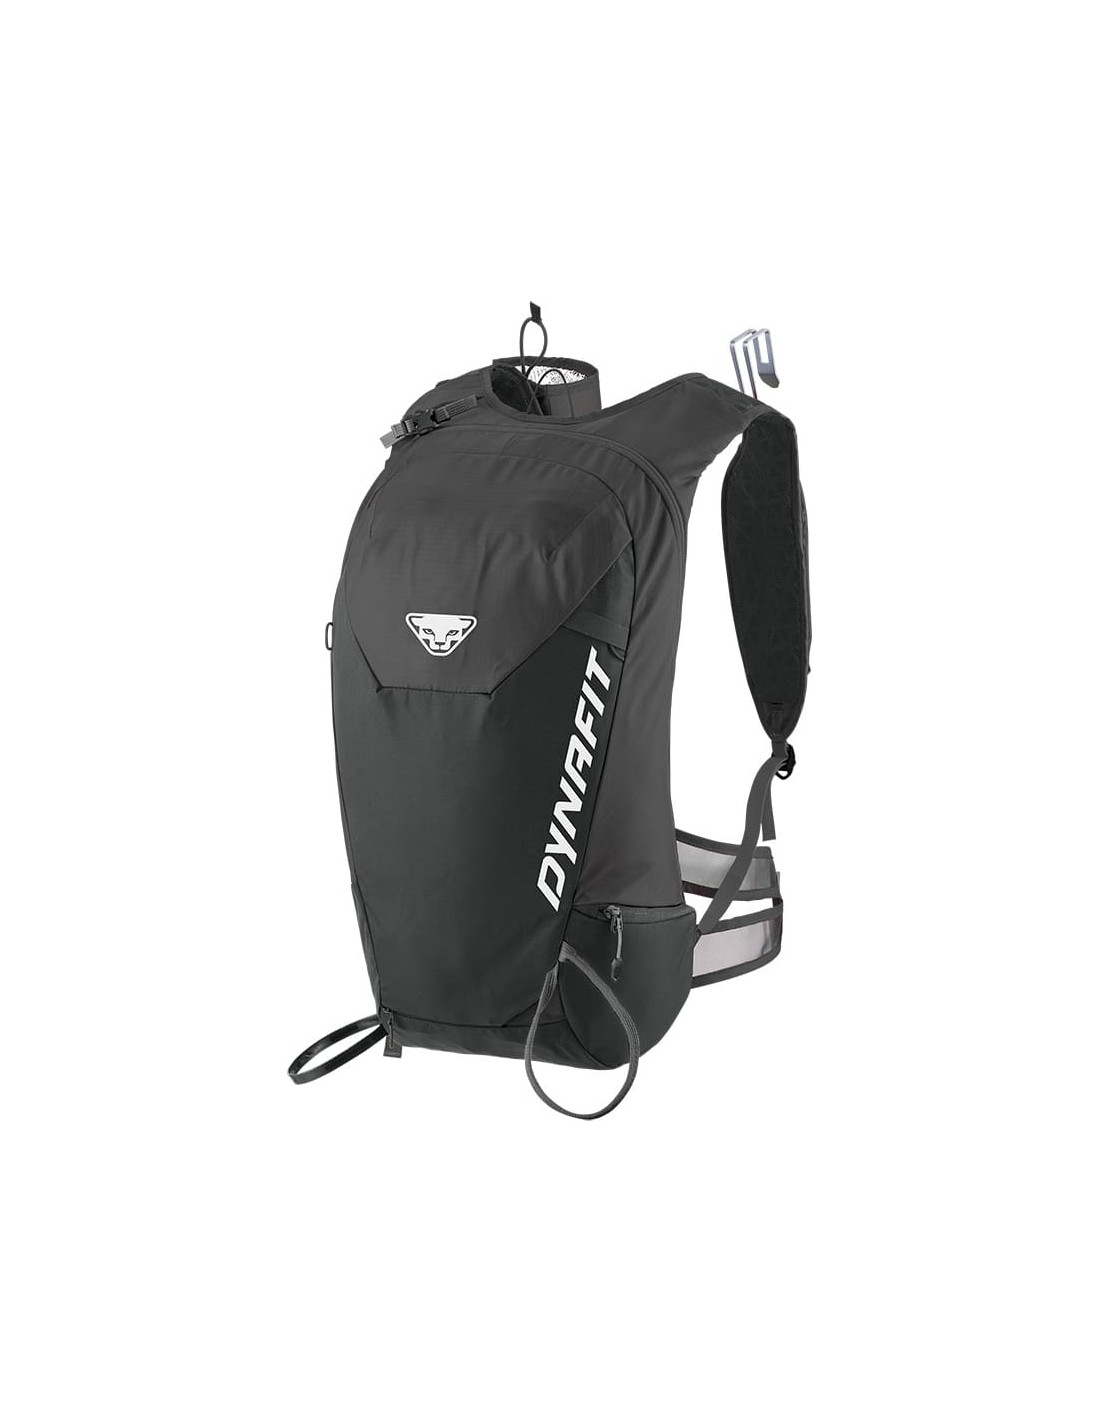 SPEED 20 BACKPACK